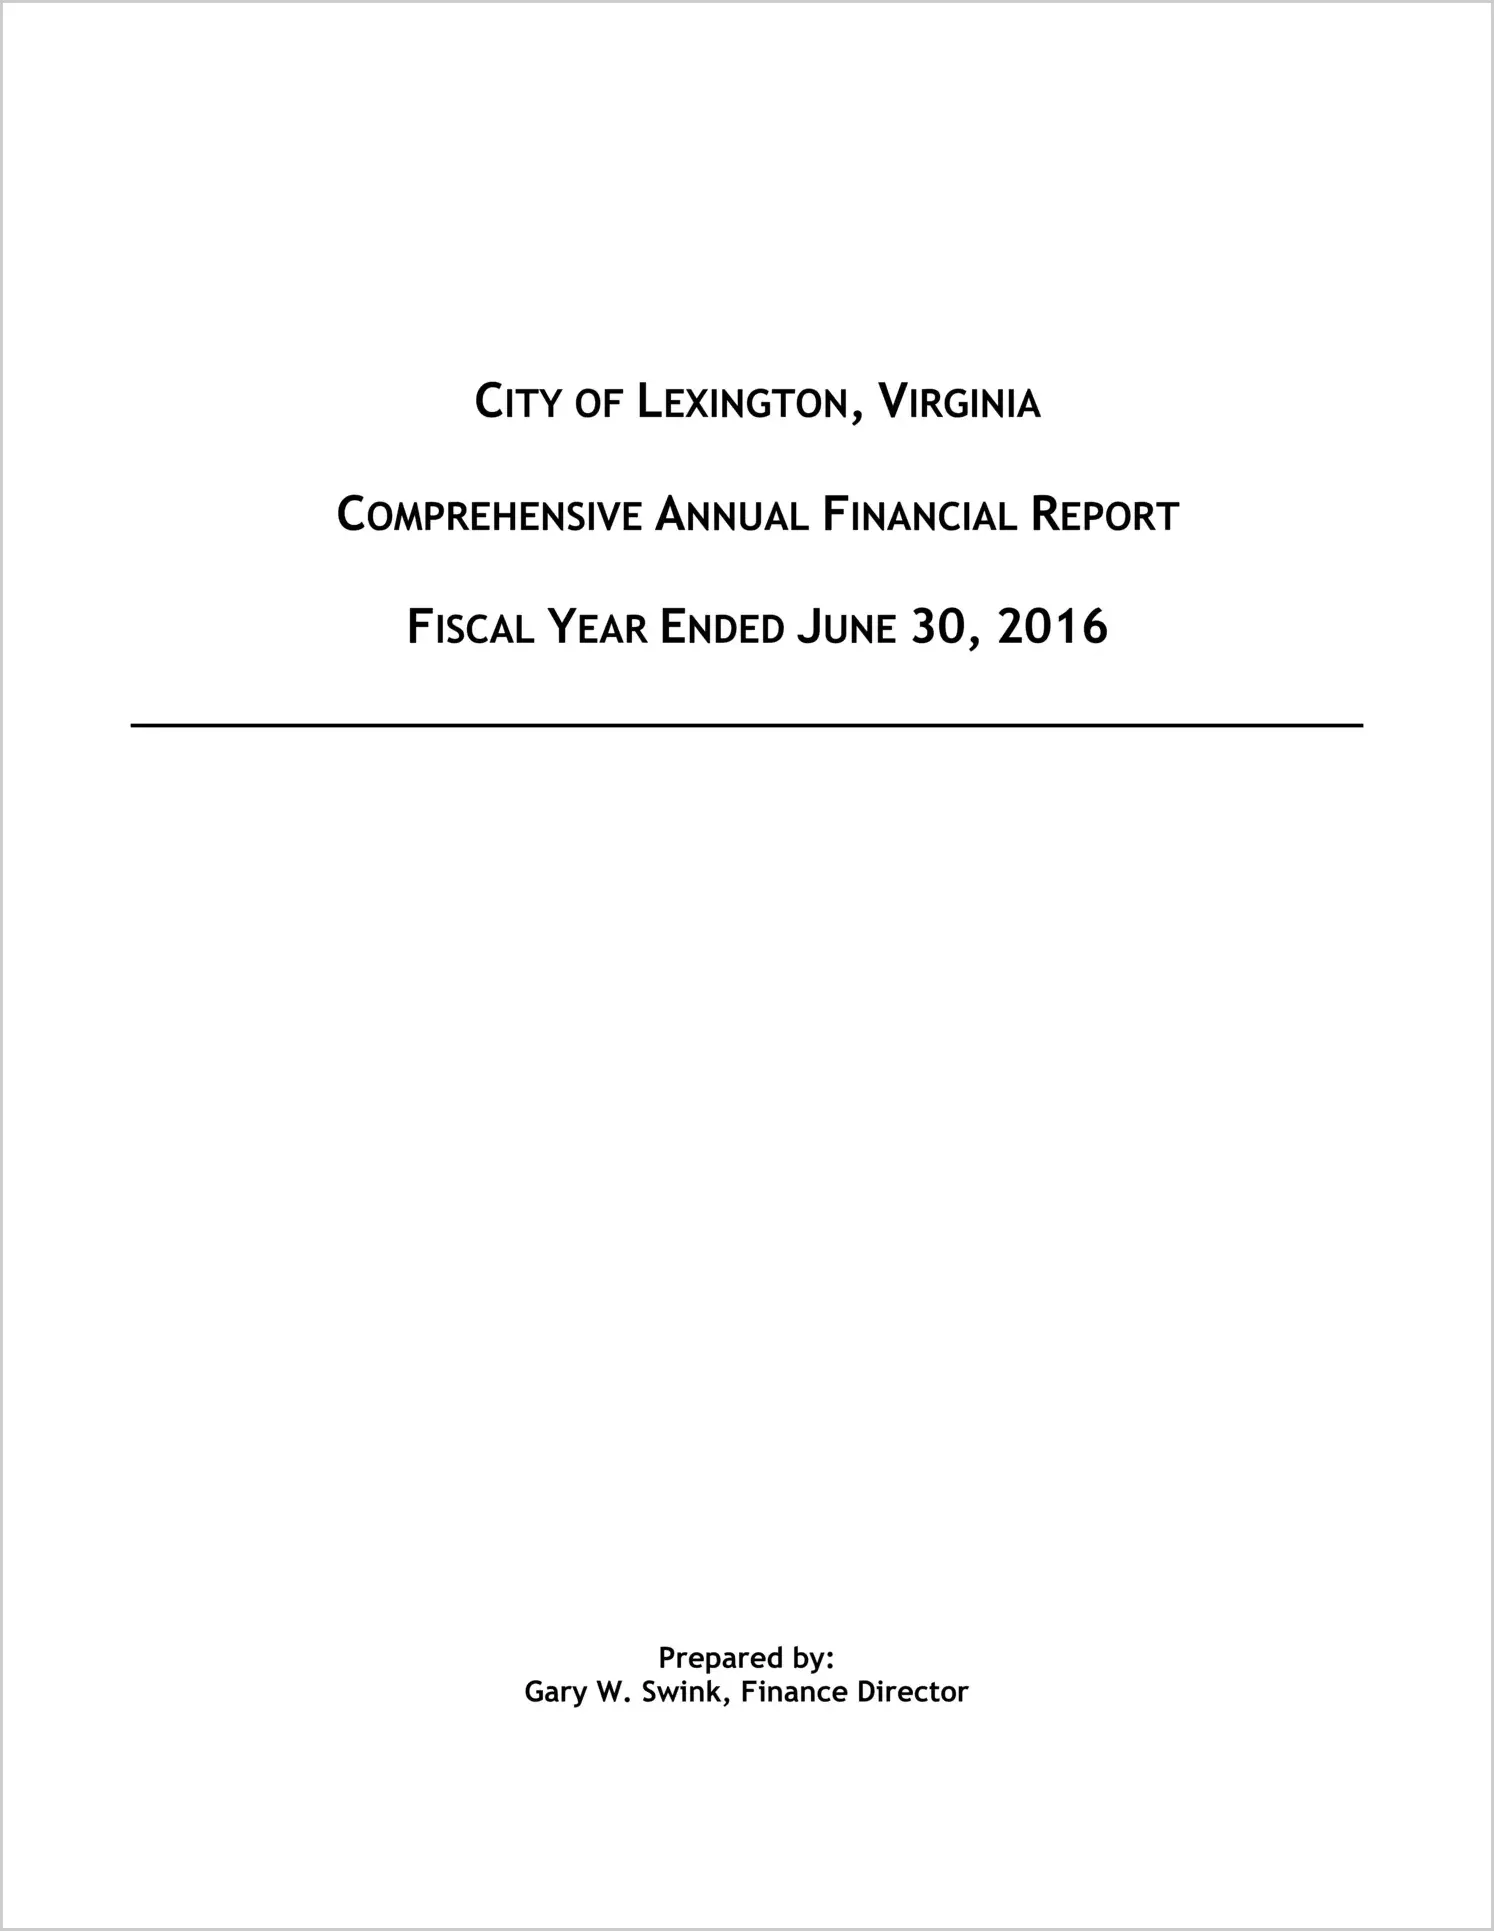 2016 Annual Financial Report for City of Lexington